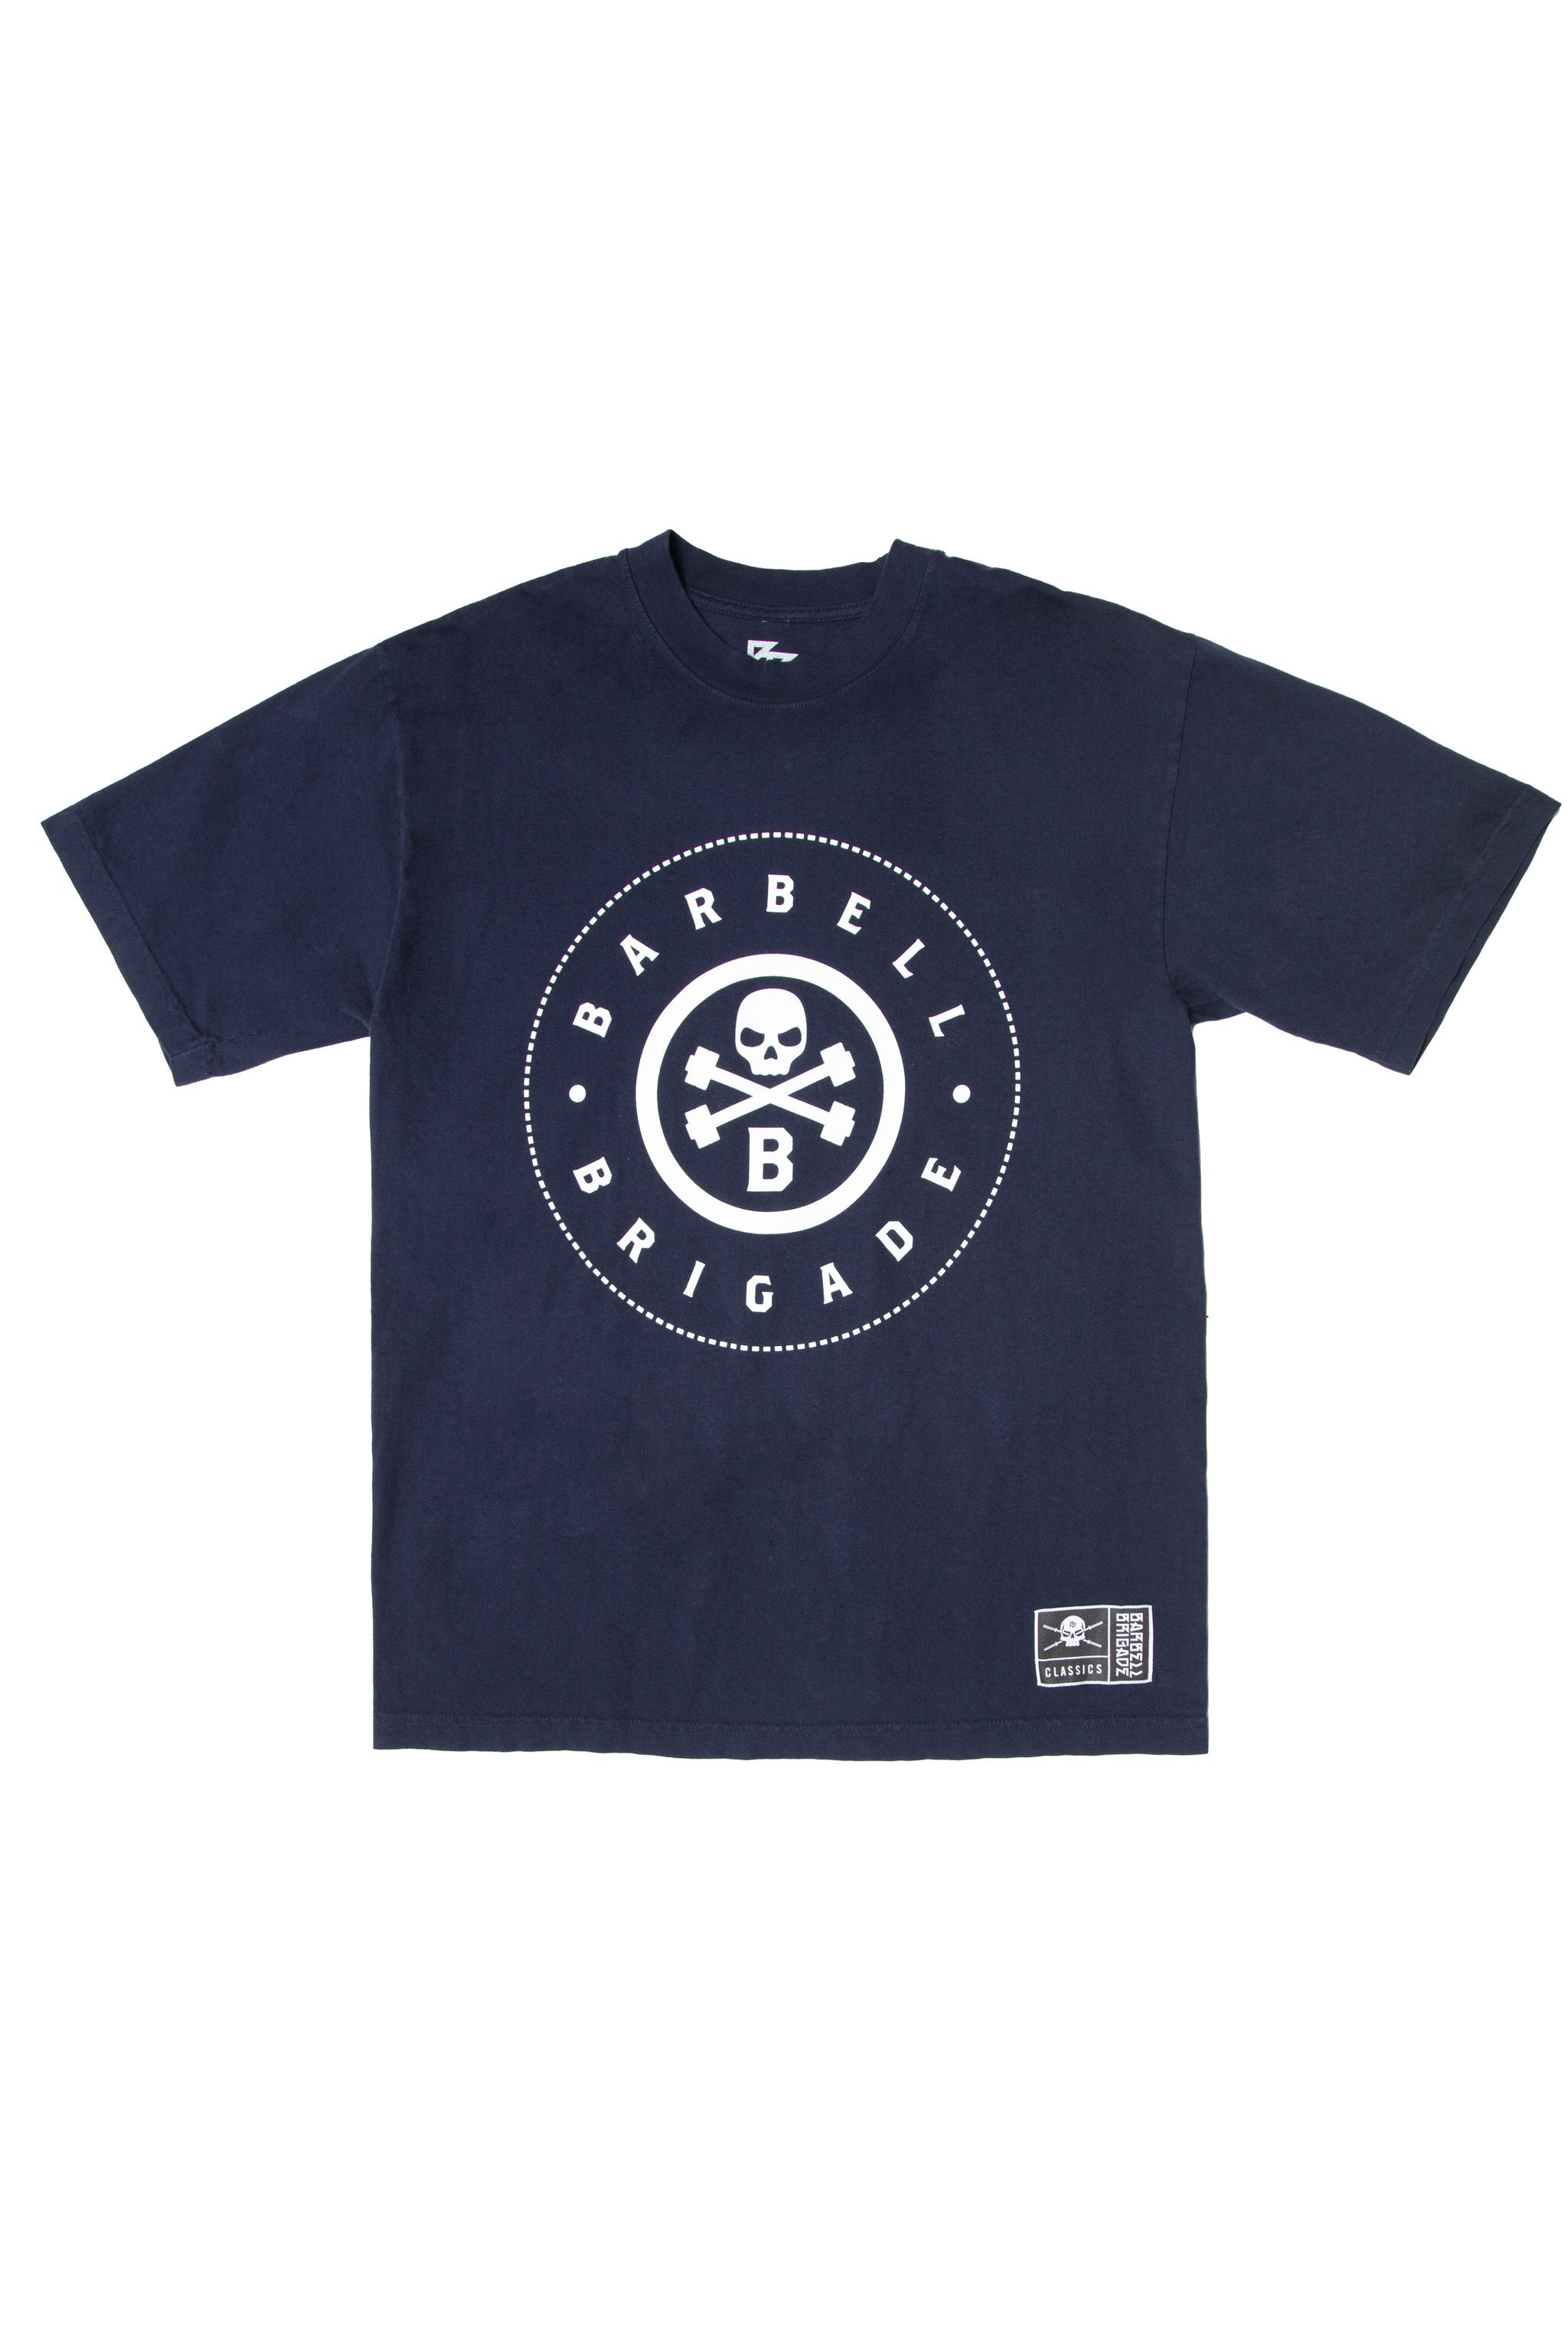 Certified - Tee (White on Navy)